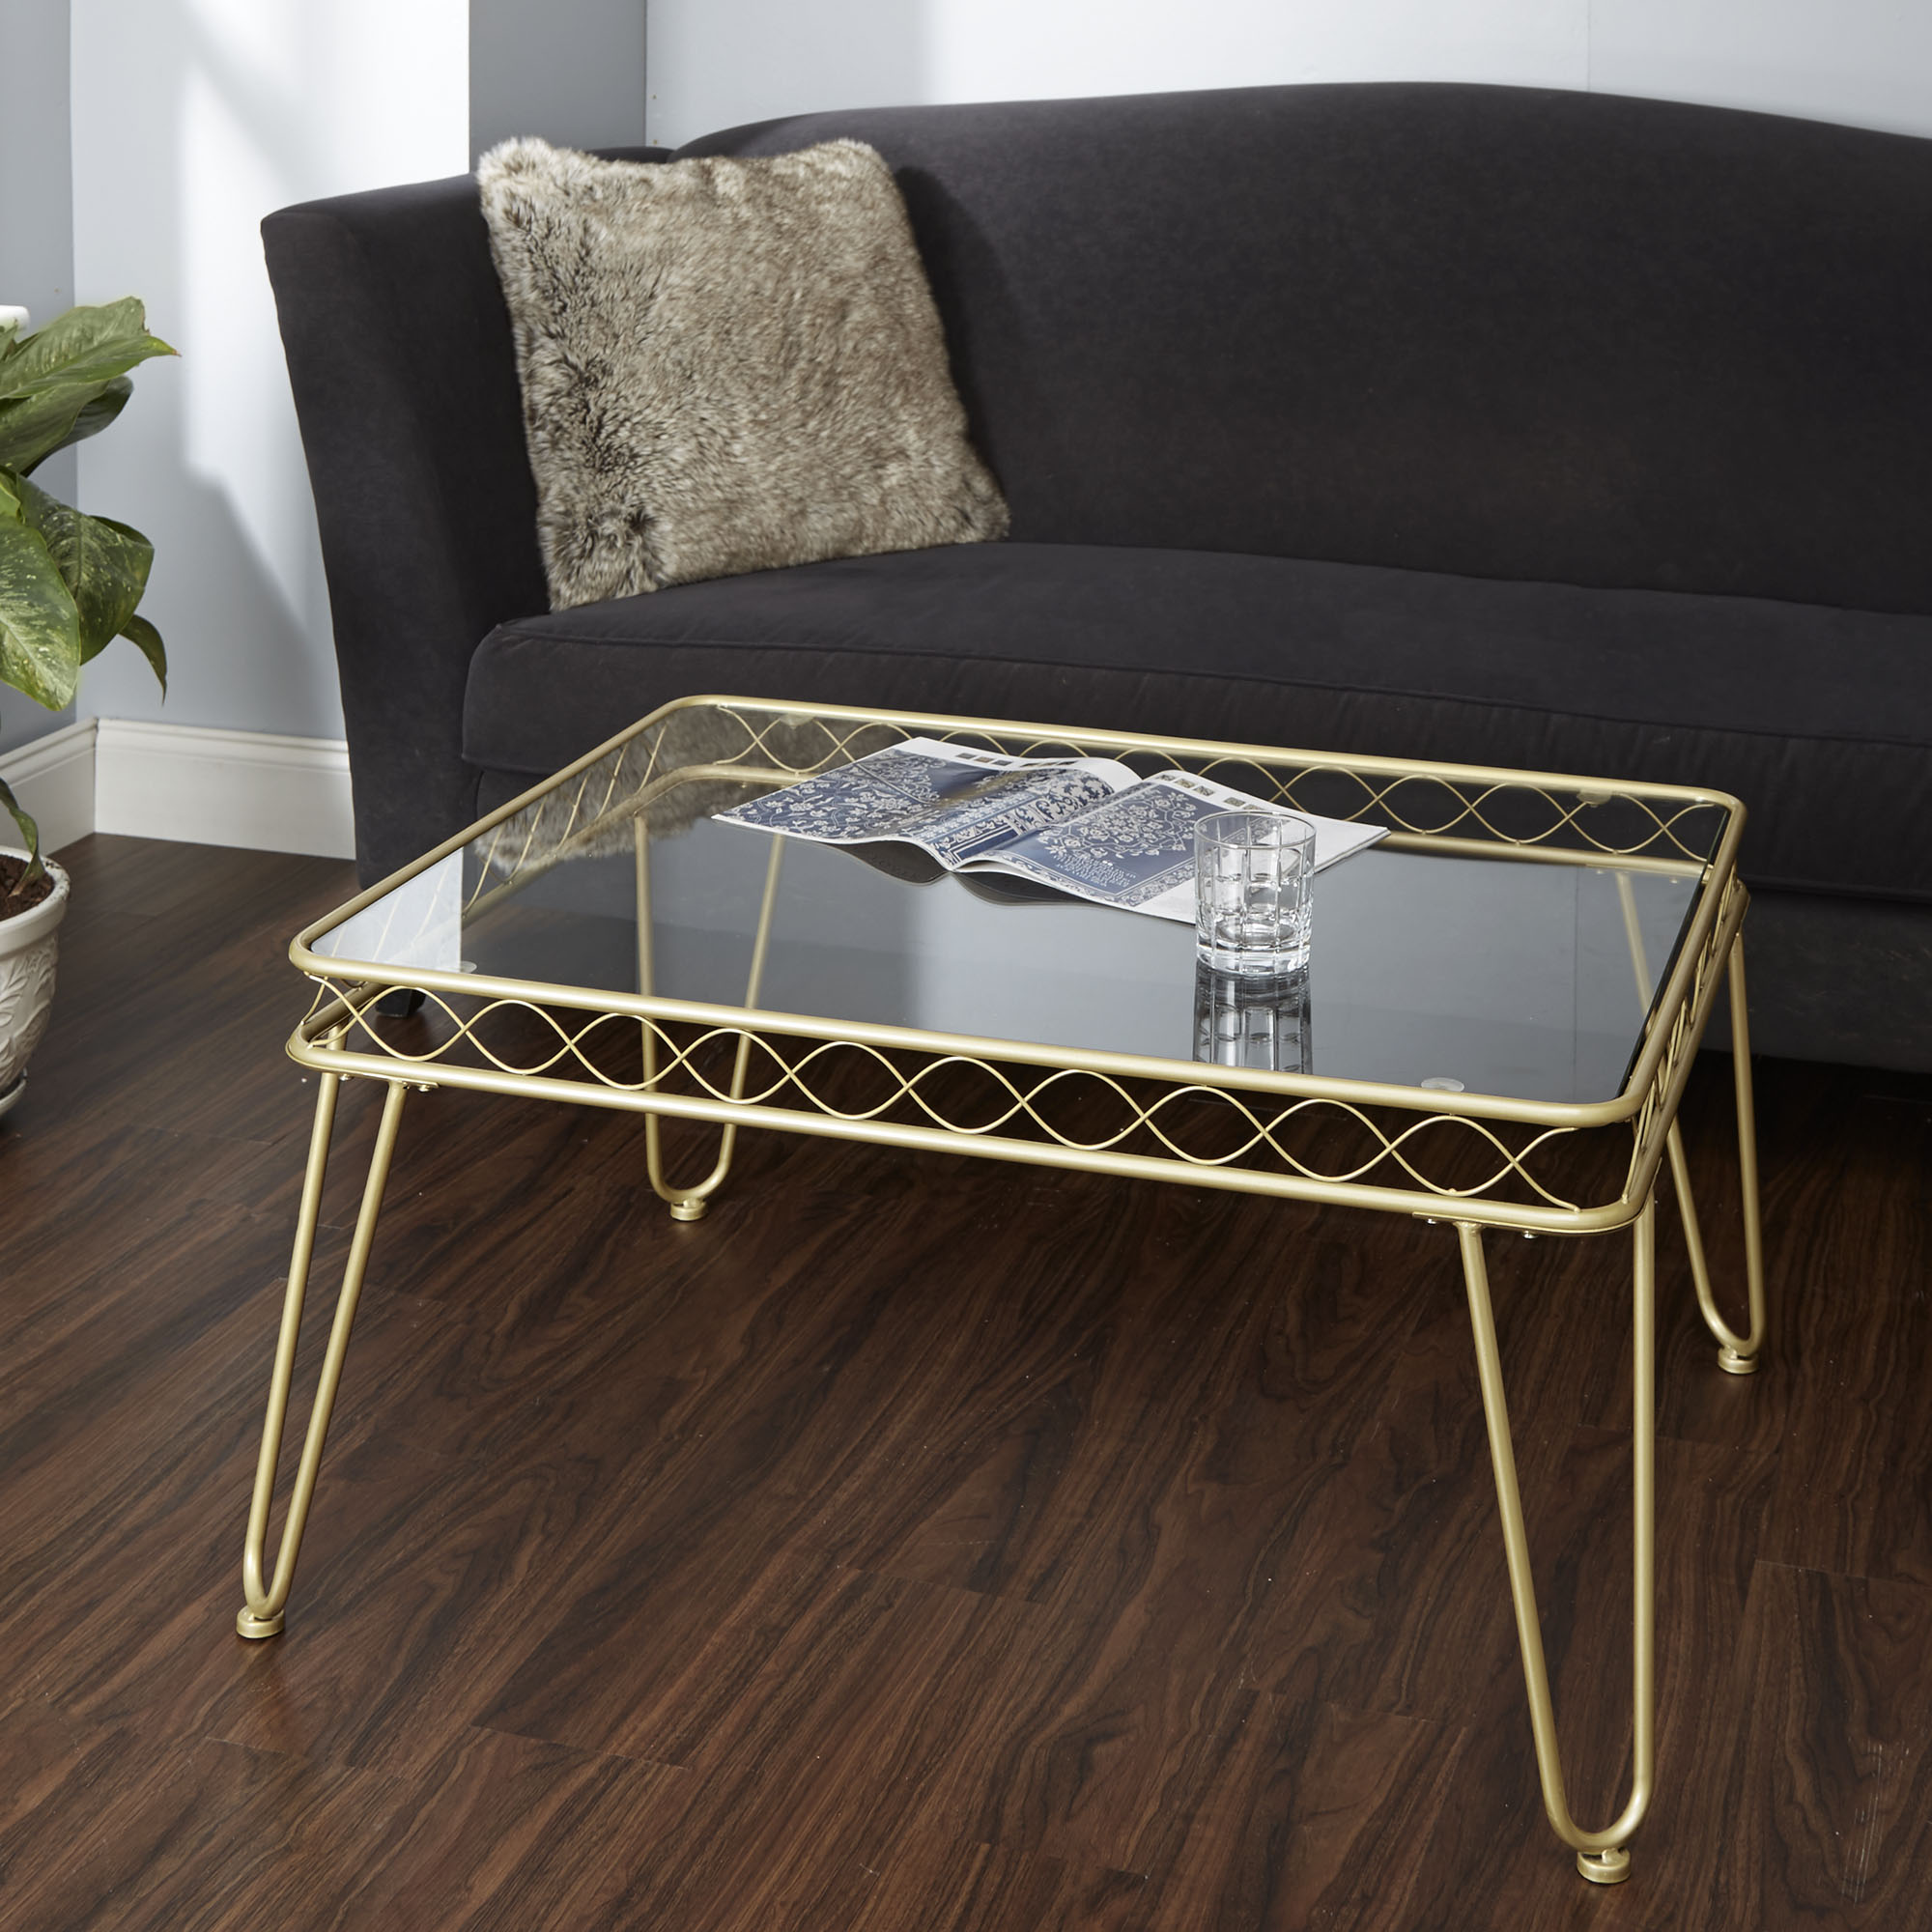 Better Homes & Gardens Mirabella Coffee Table - image 3 of 3